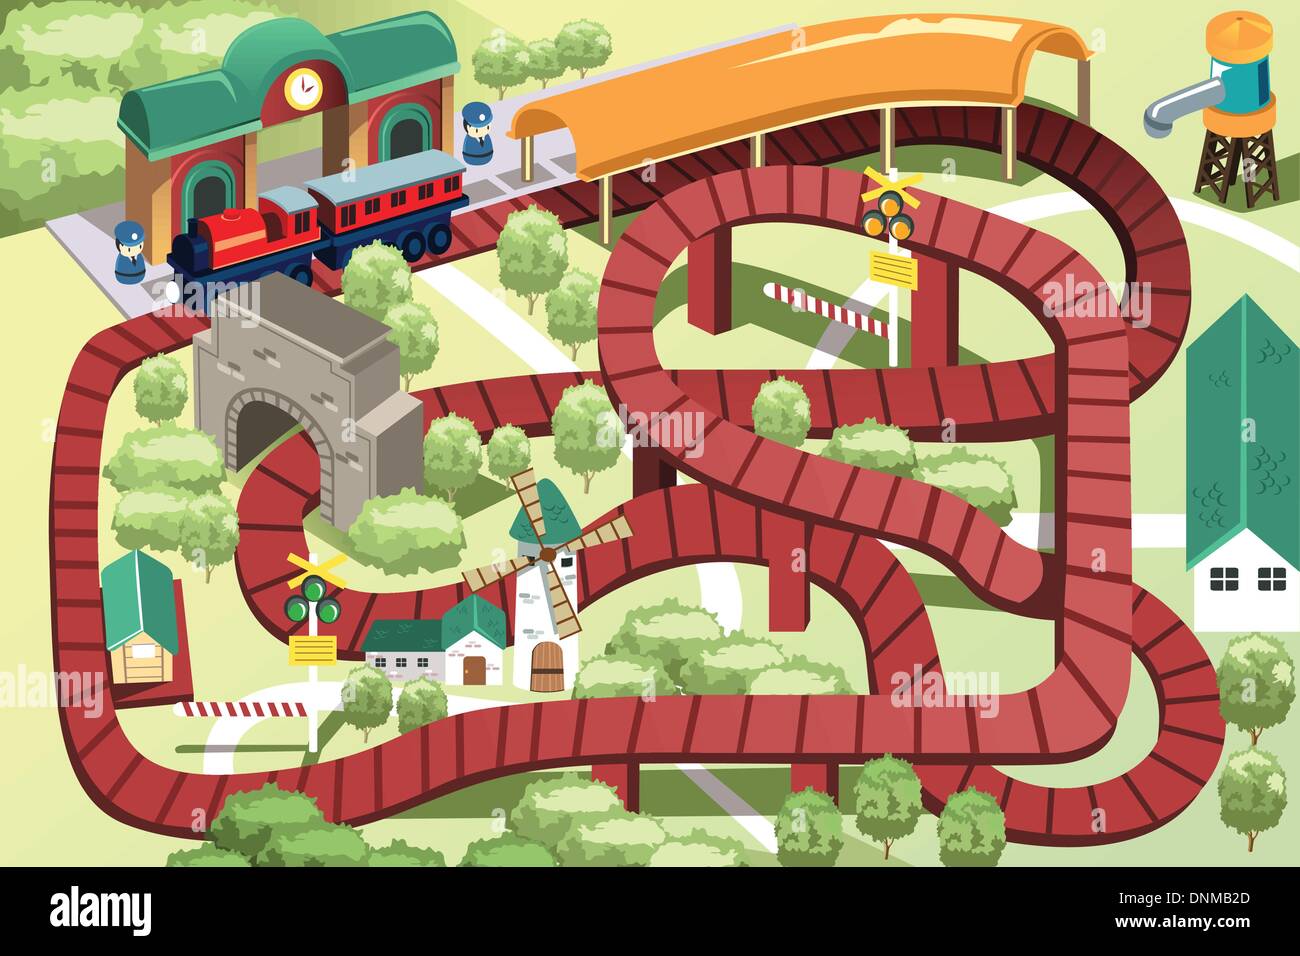 A vector illustration of a miniature train toy track Stock Vector